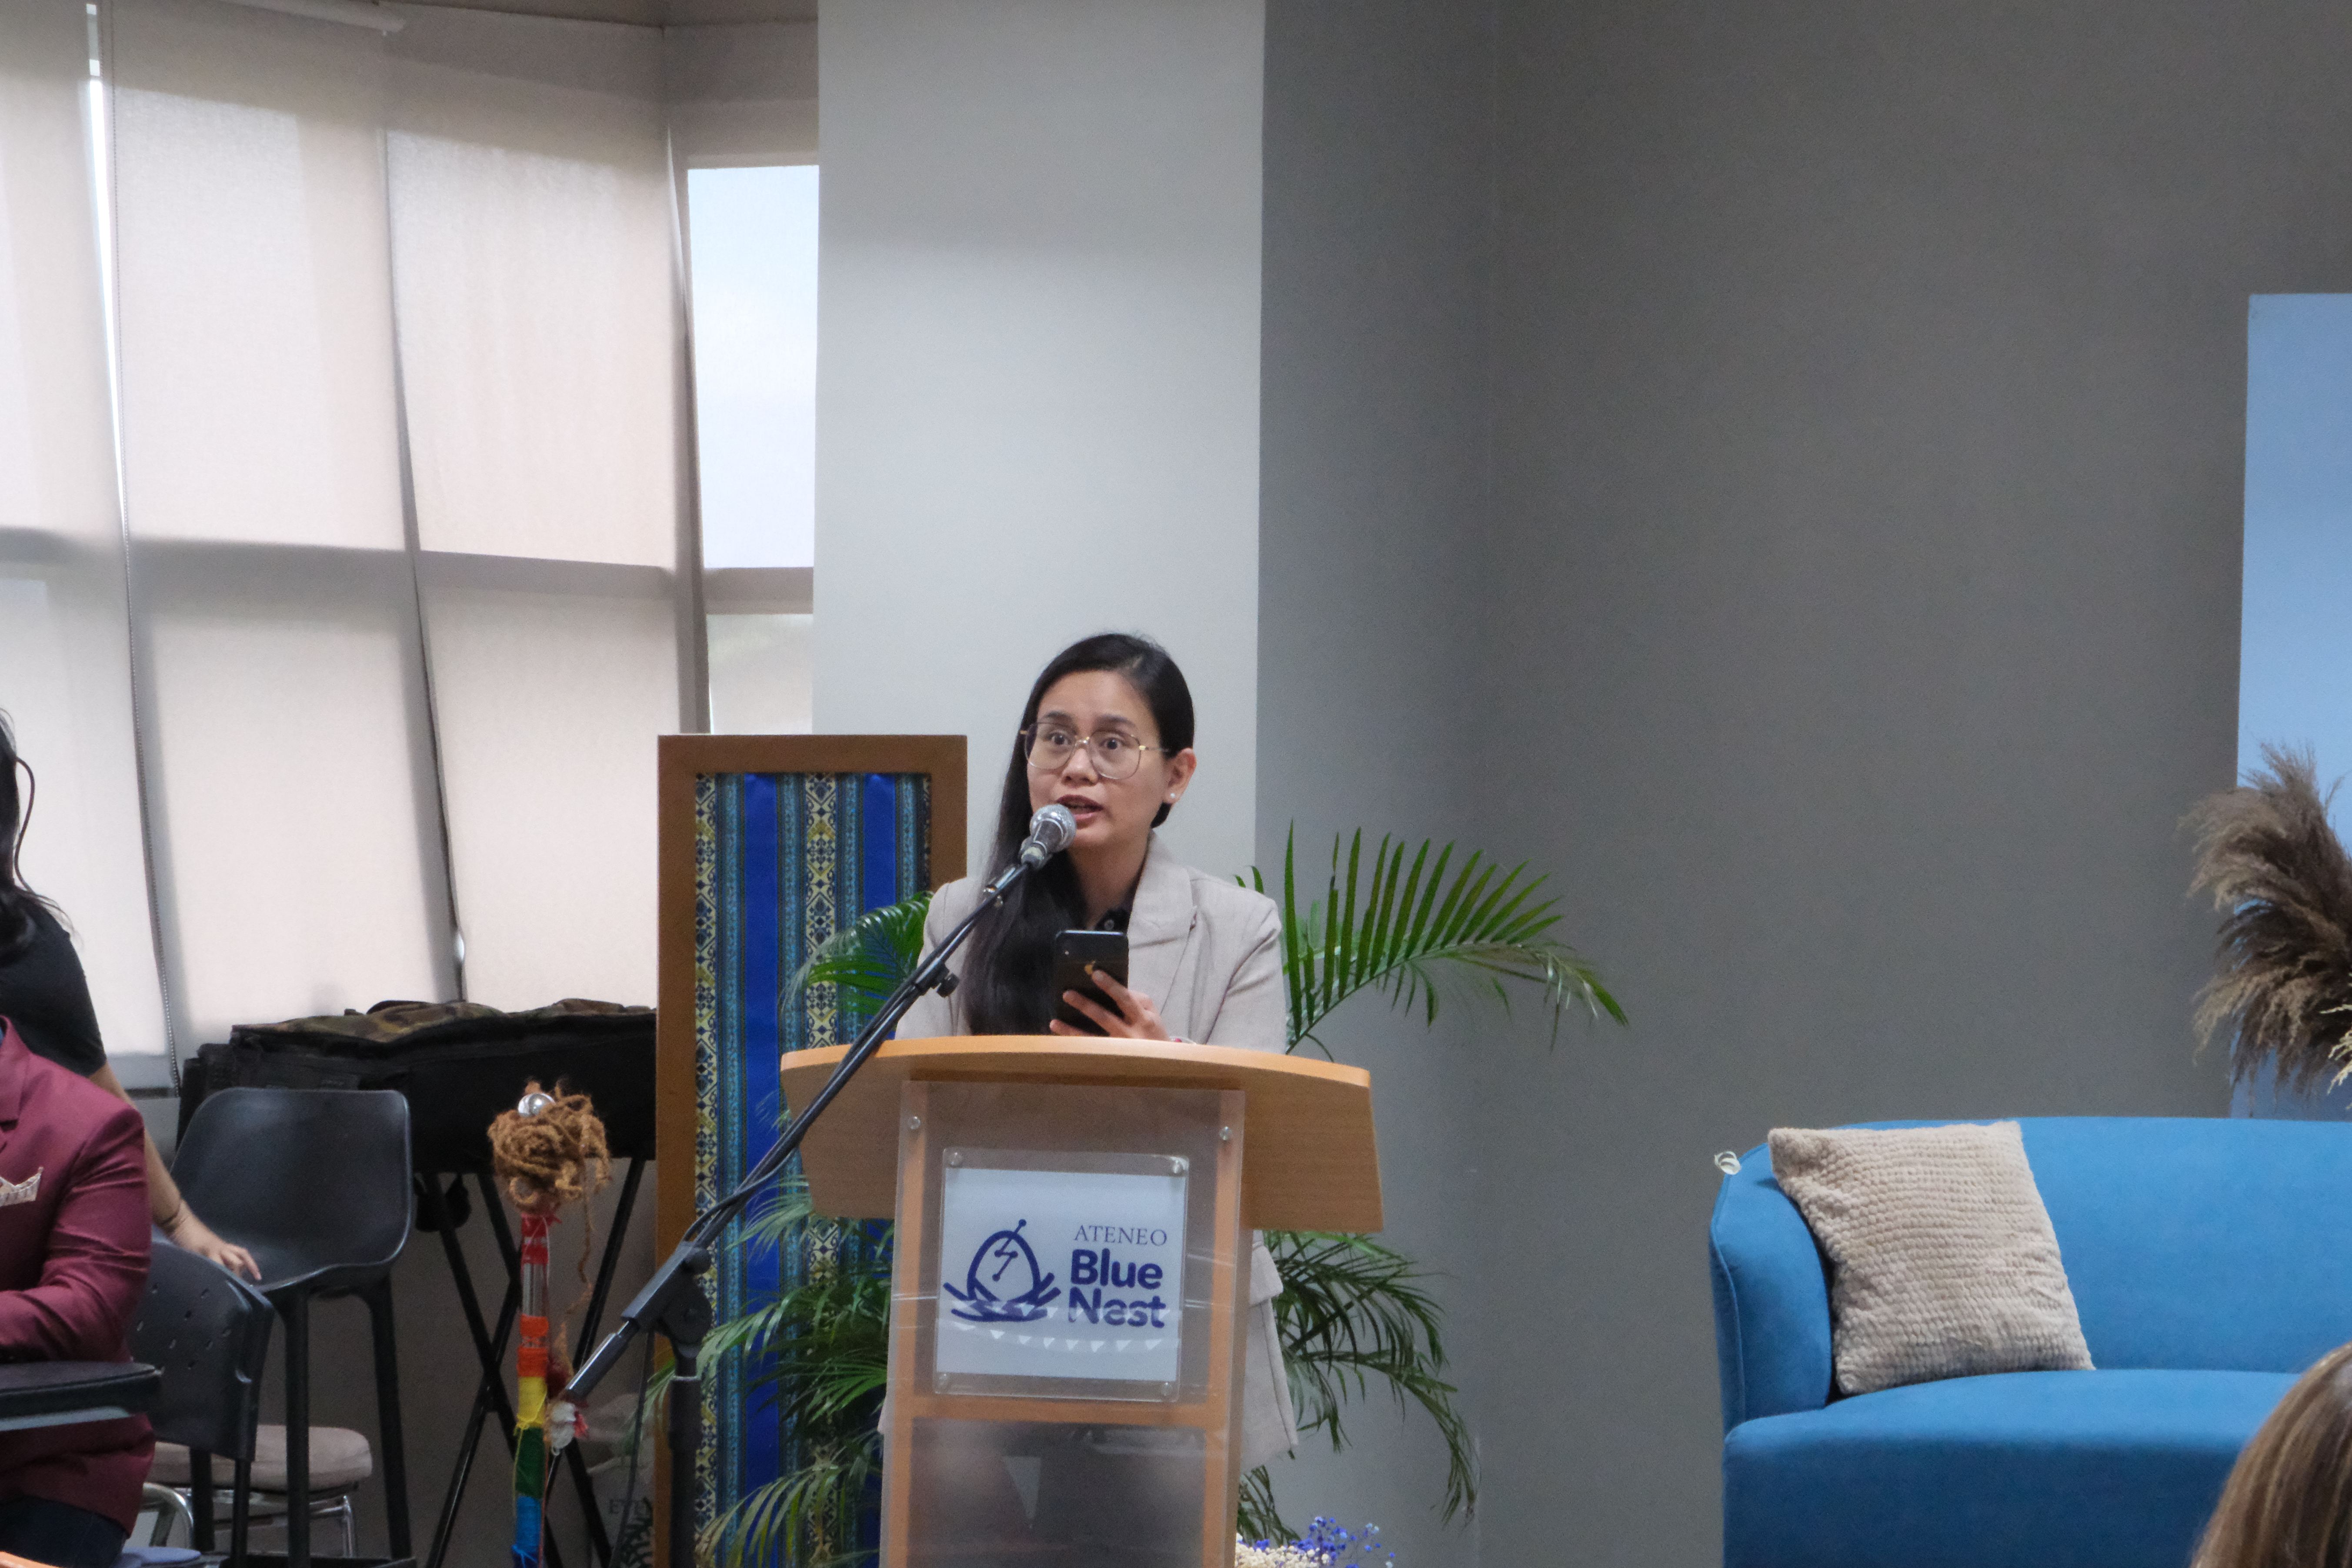 Prof. Jeia Tirante of the UP – Technology Management Center giving the opening remarks